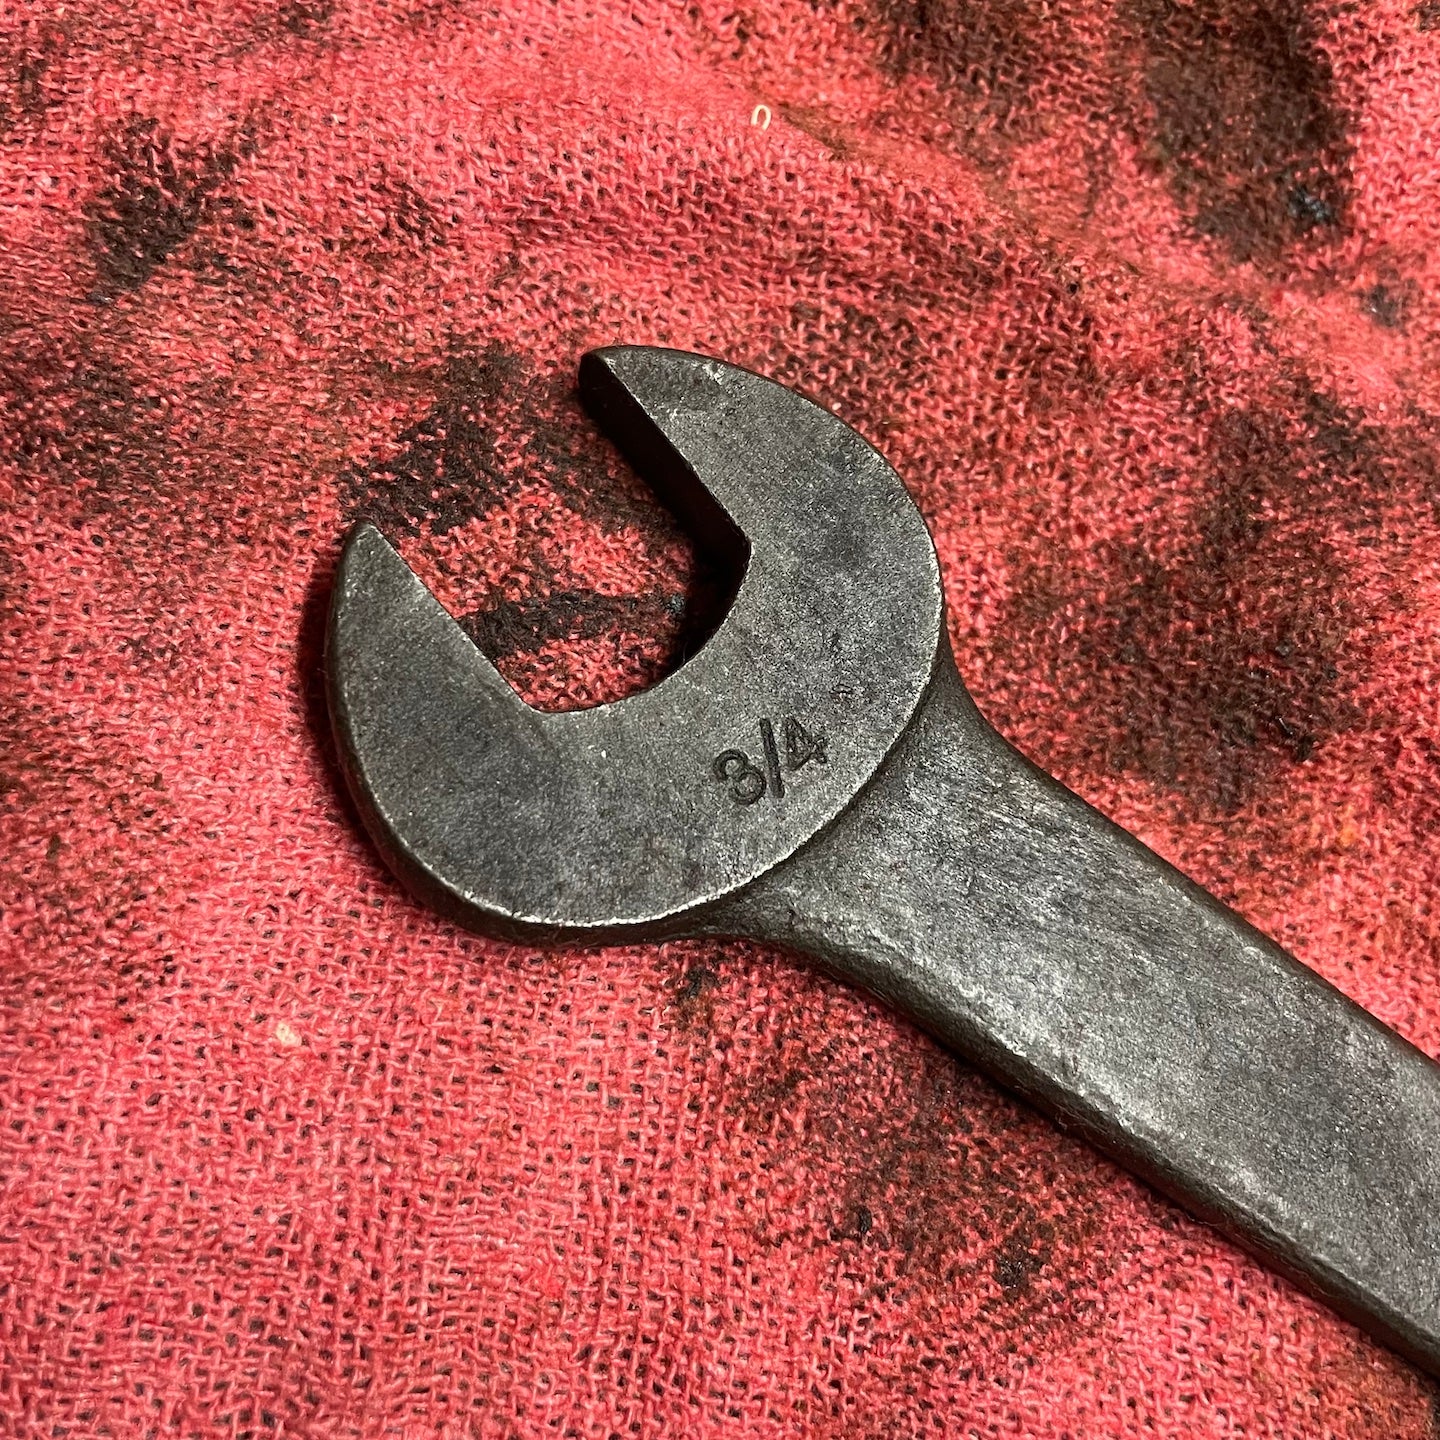 Billings NOS WWII Era Open End 5/8" x 3/4" Wrench